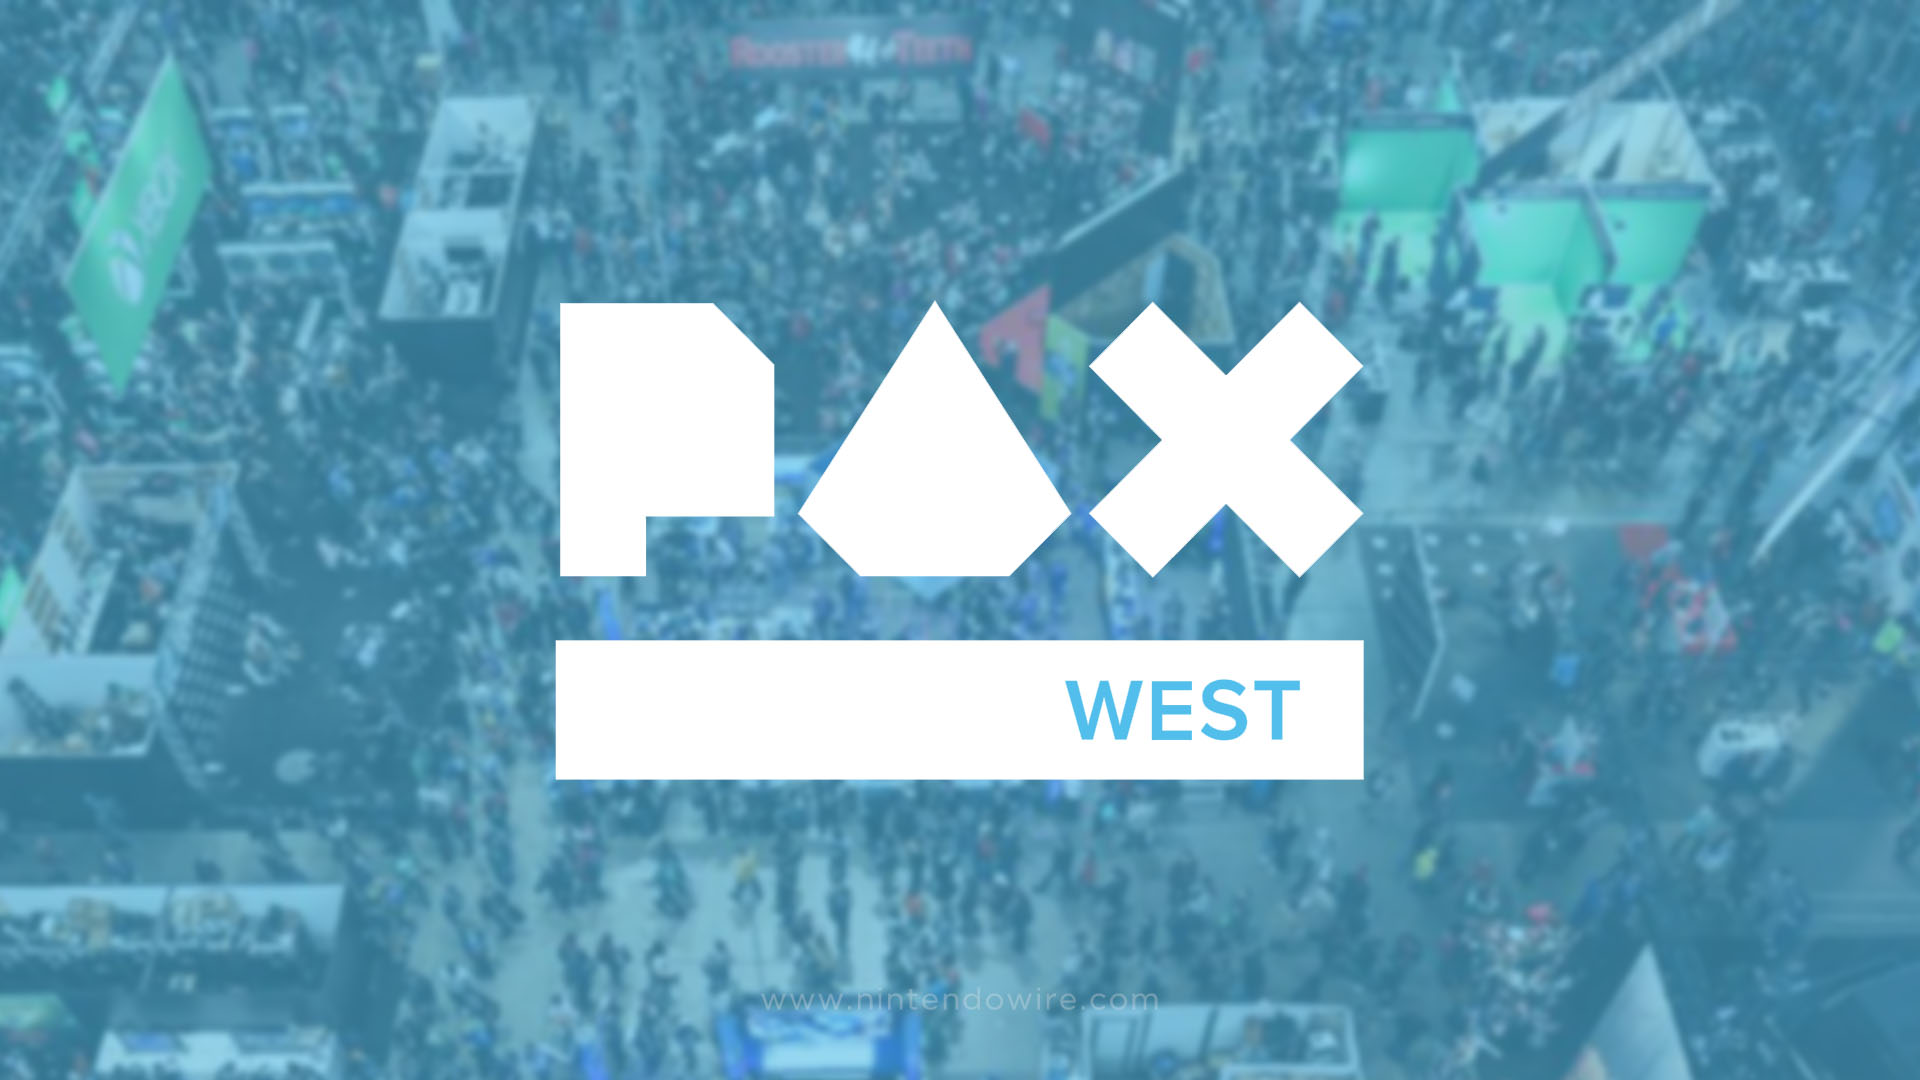 Time to get your game on PAX West begins Friday, August 30th